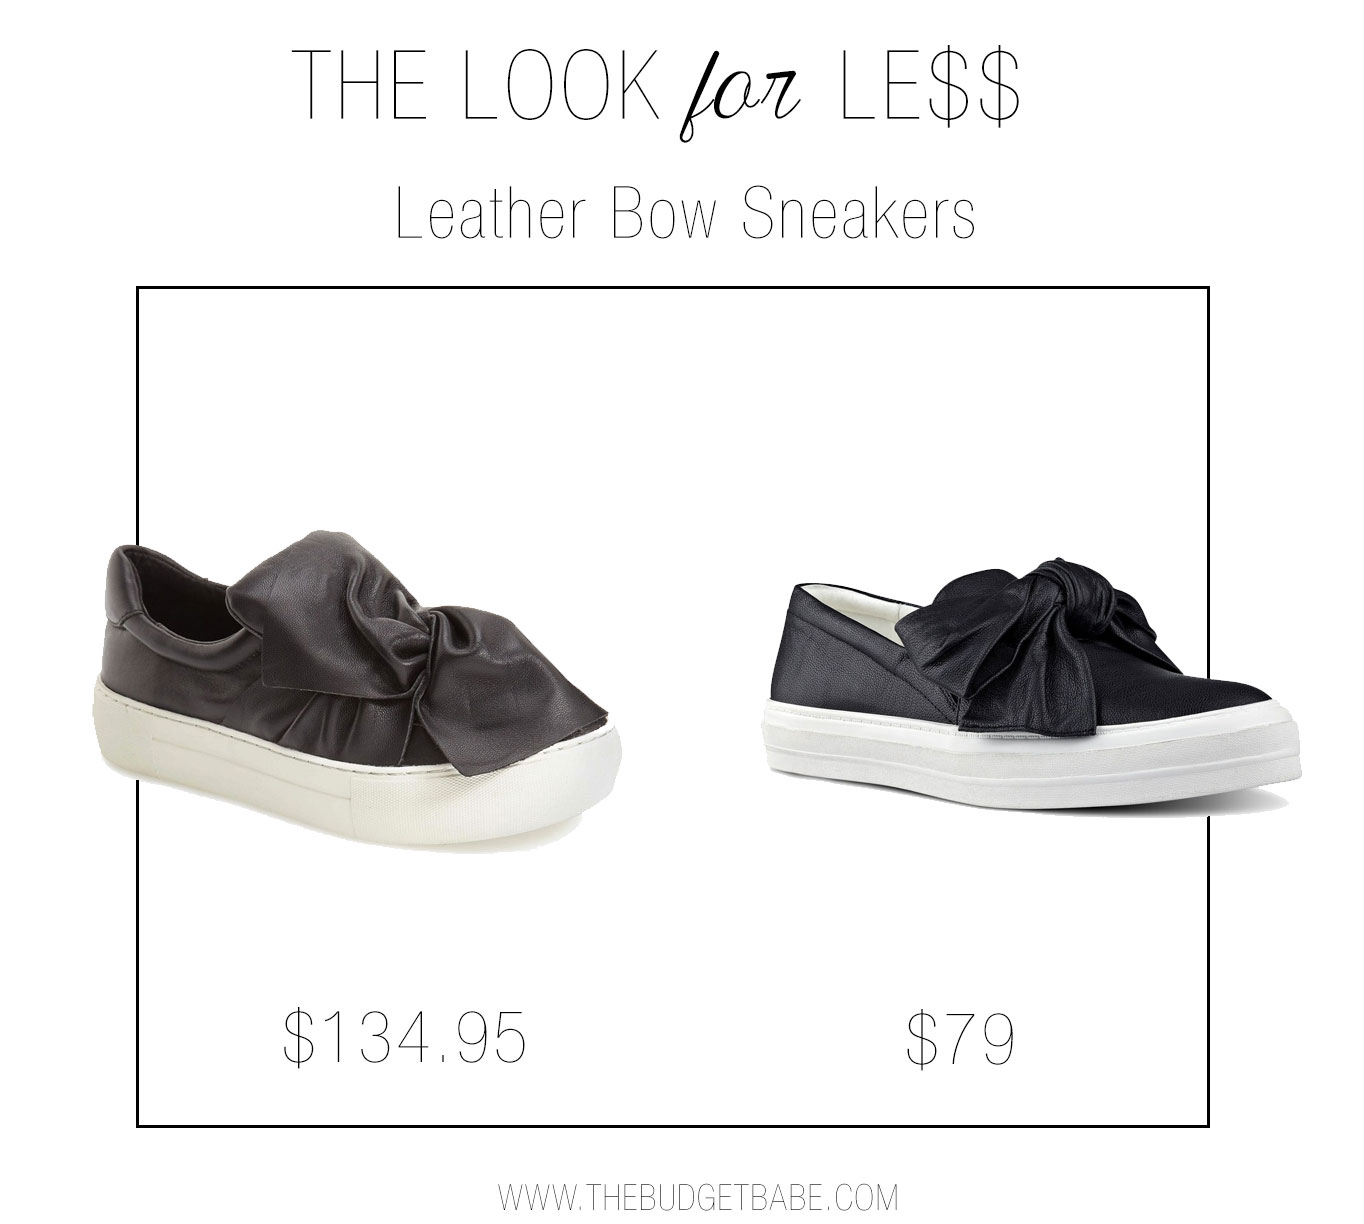 Try the leather bow sneaker look for less.